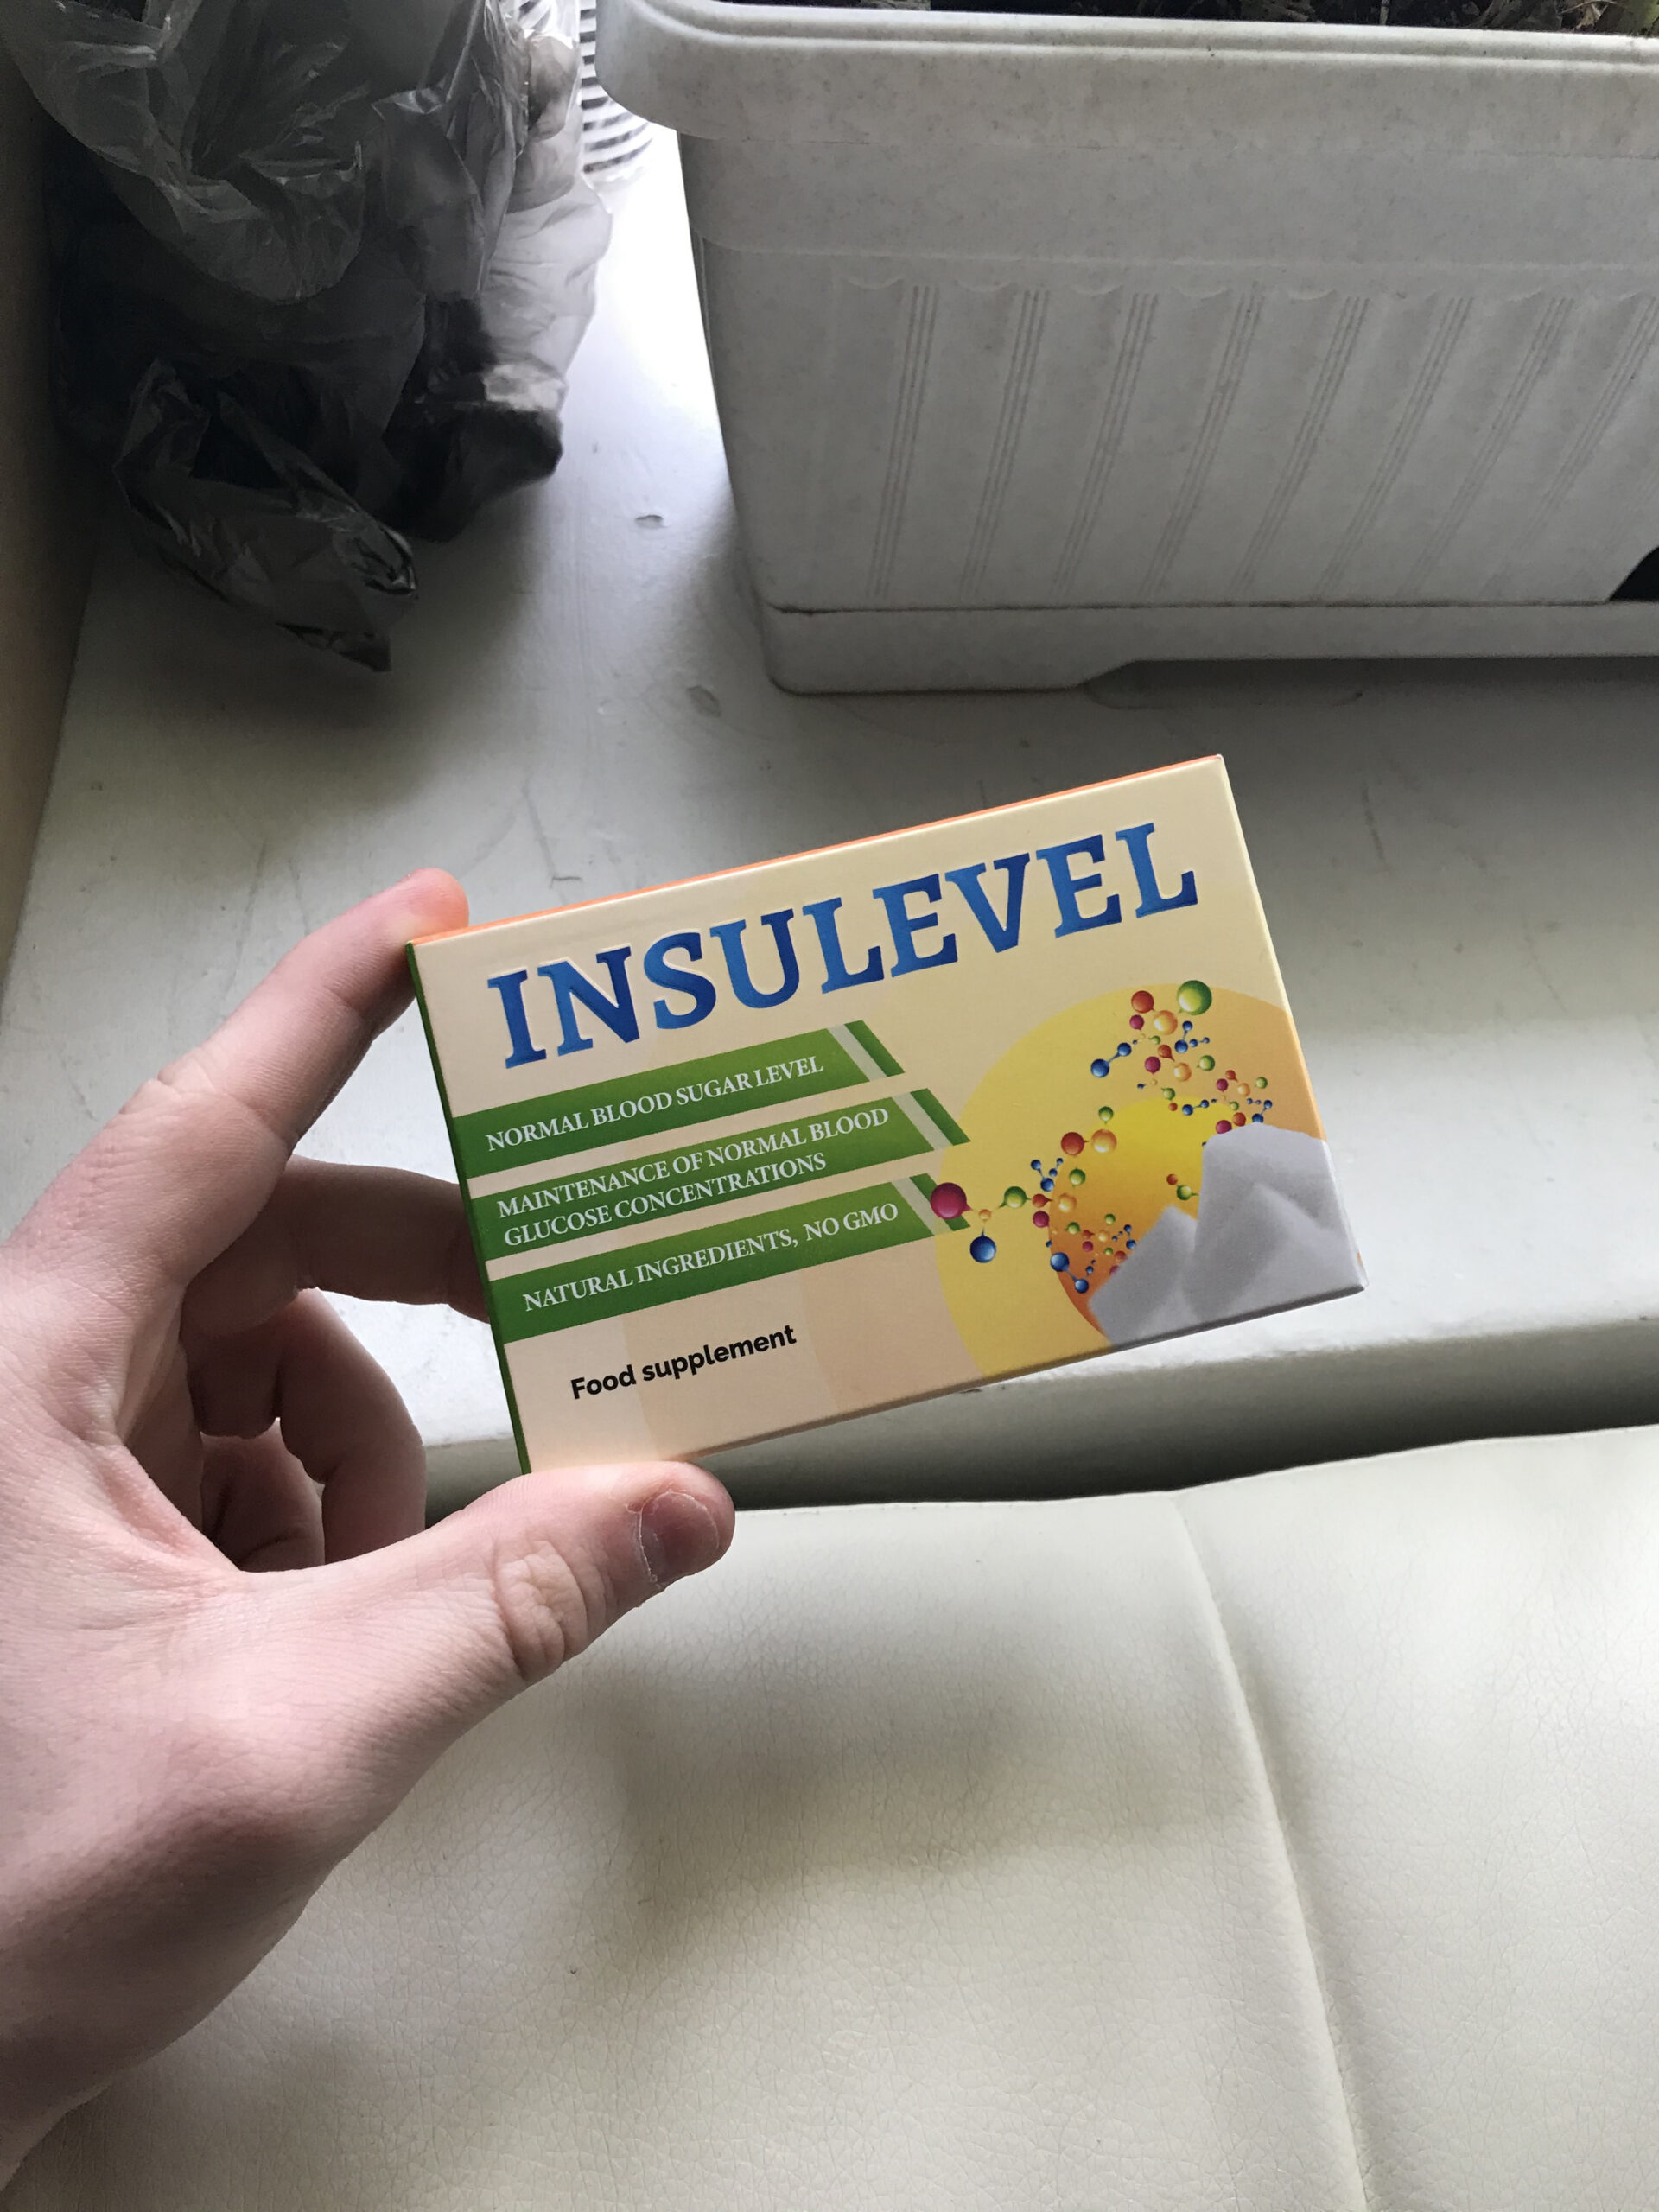 INSULEVEL - review